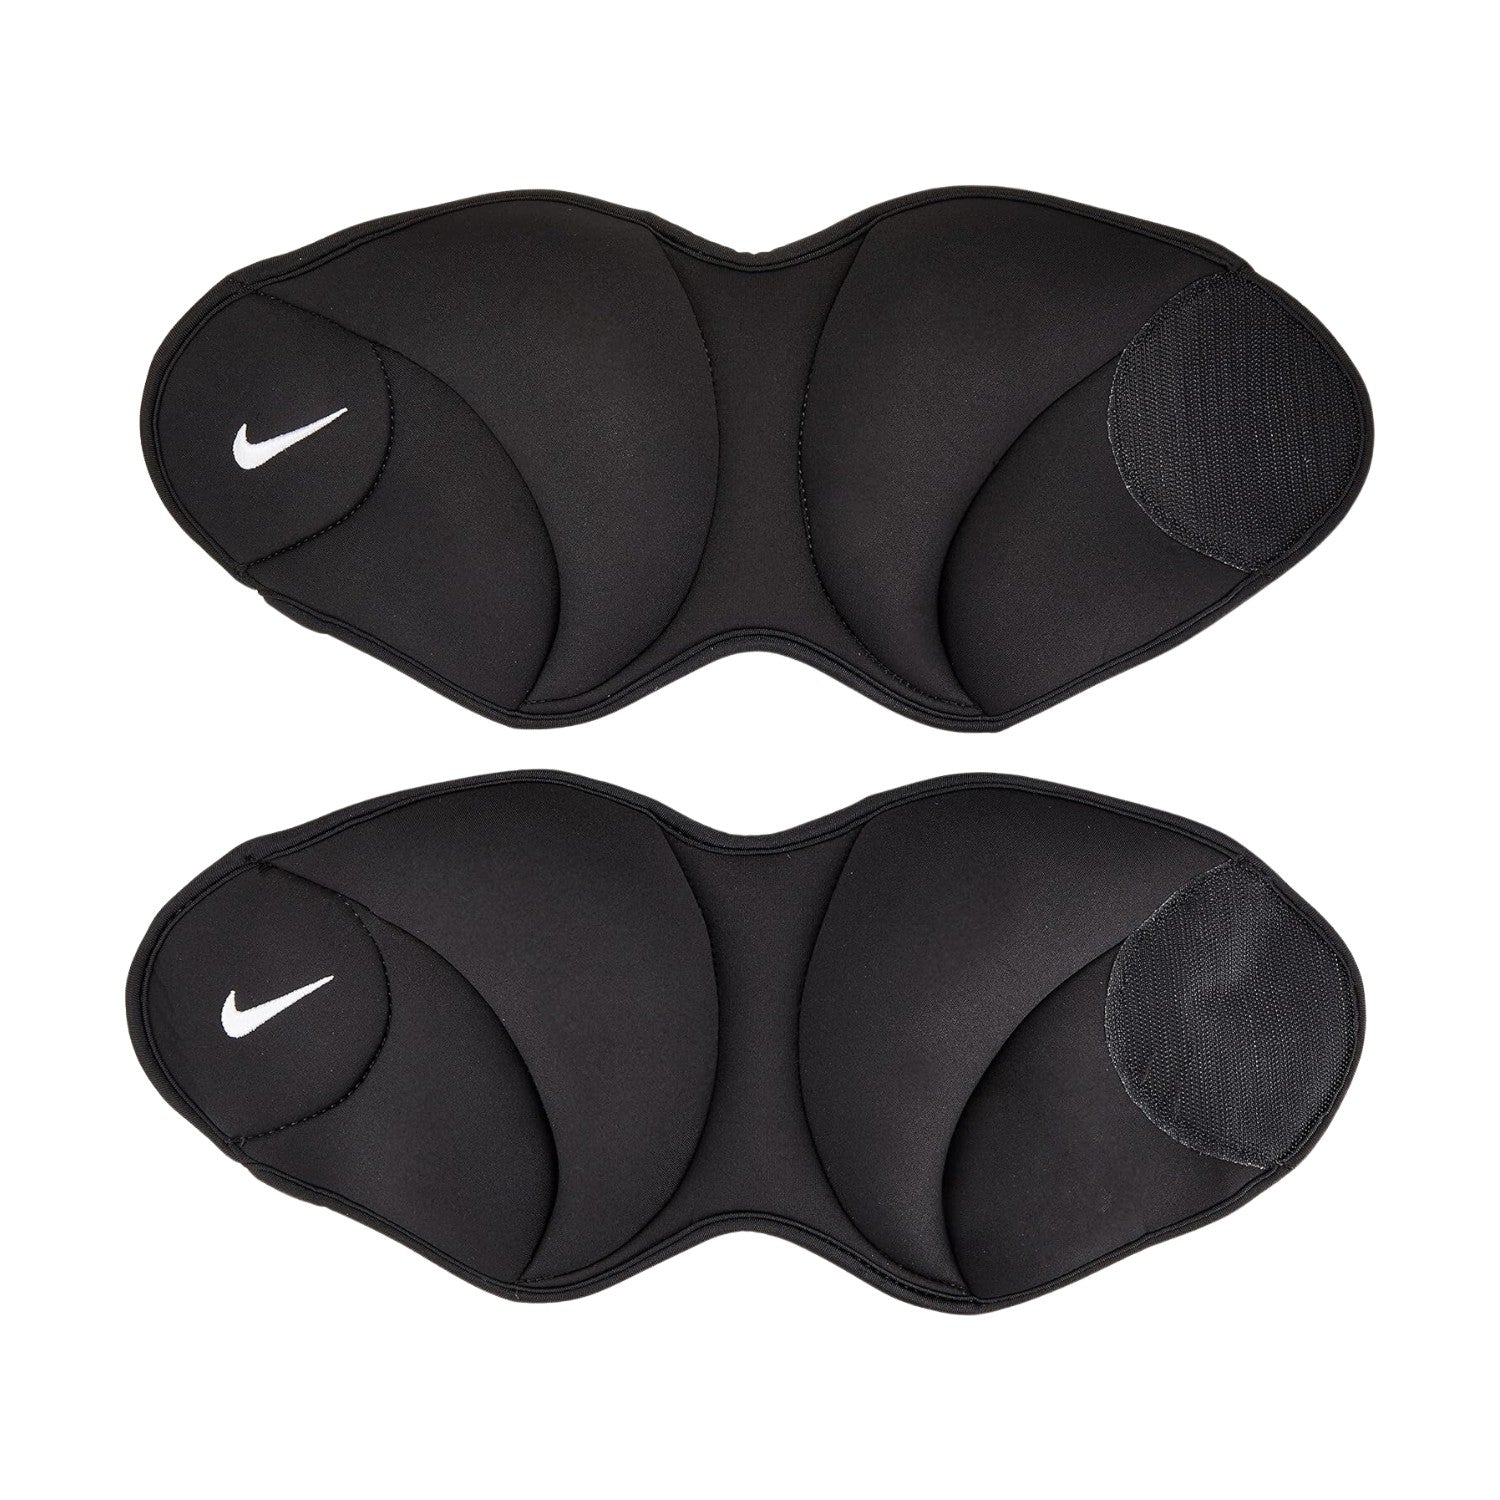 Nike Ankle Weights 2.5lbs Each 2 Pack Unisex Style : N1000814